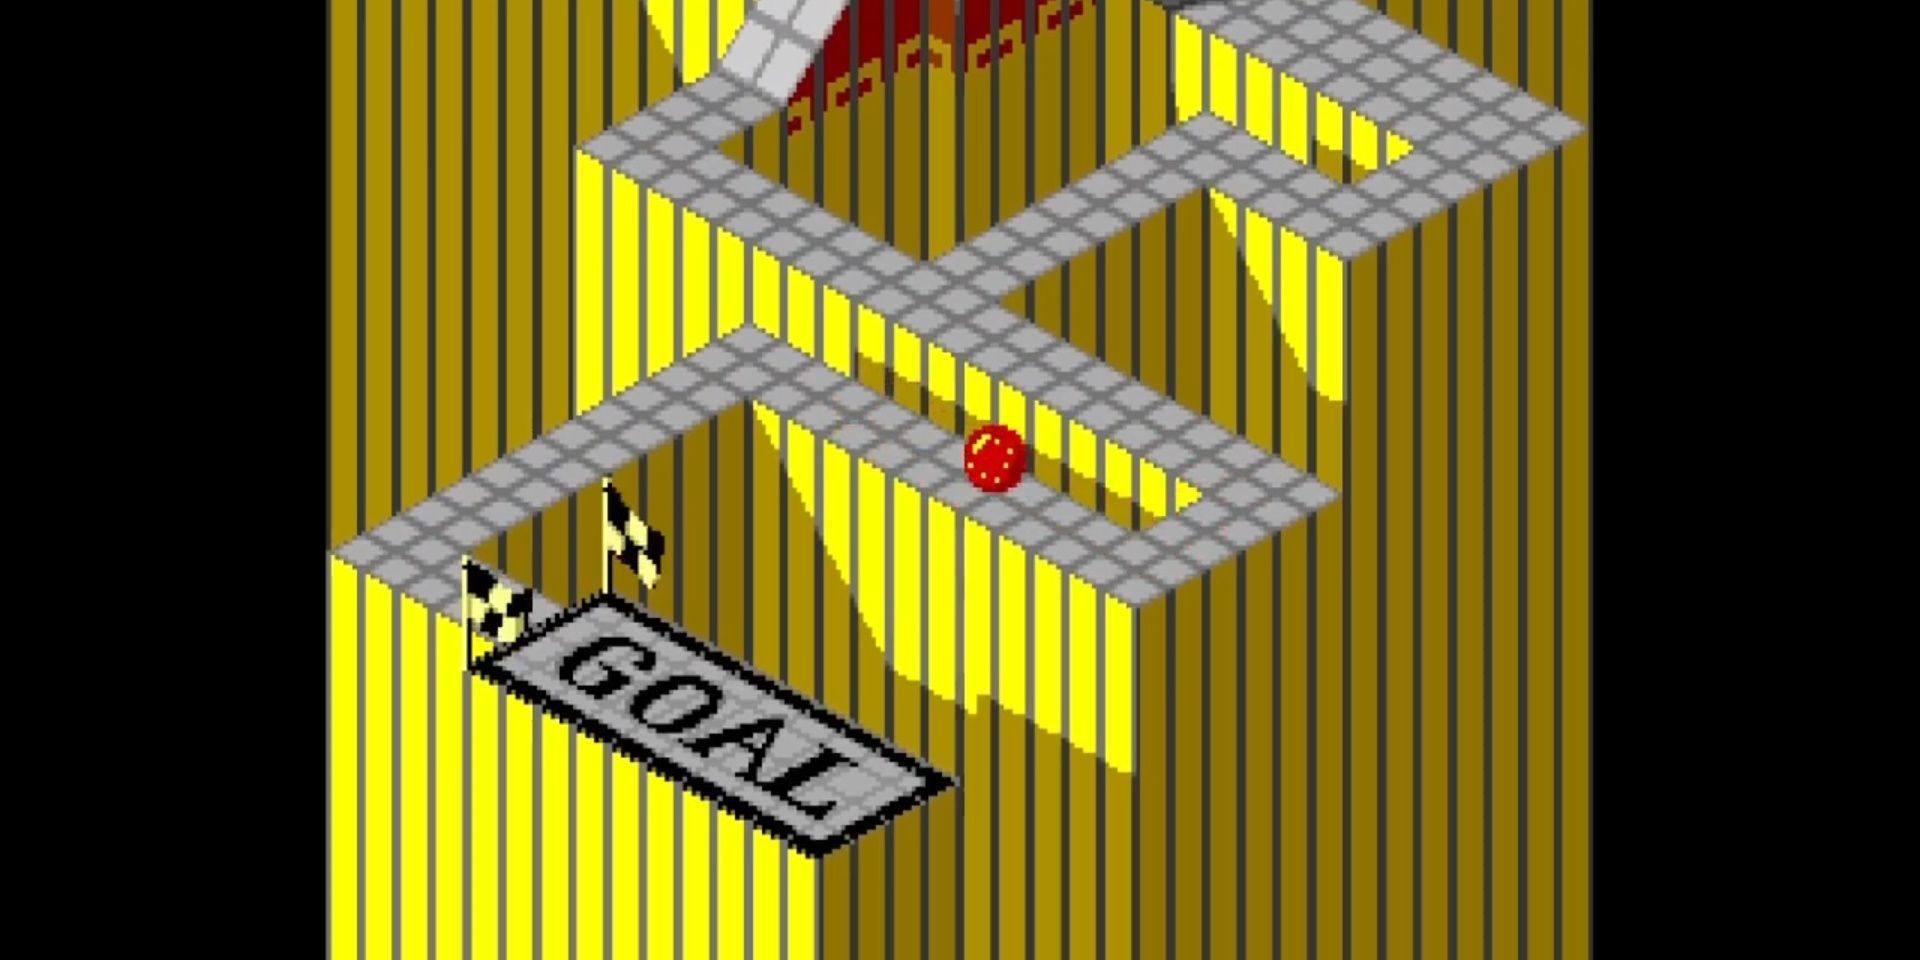 One of the first levels of Marble Madness